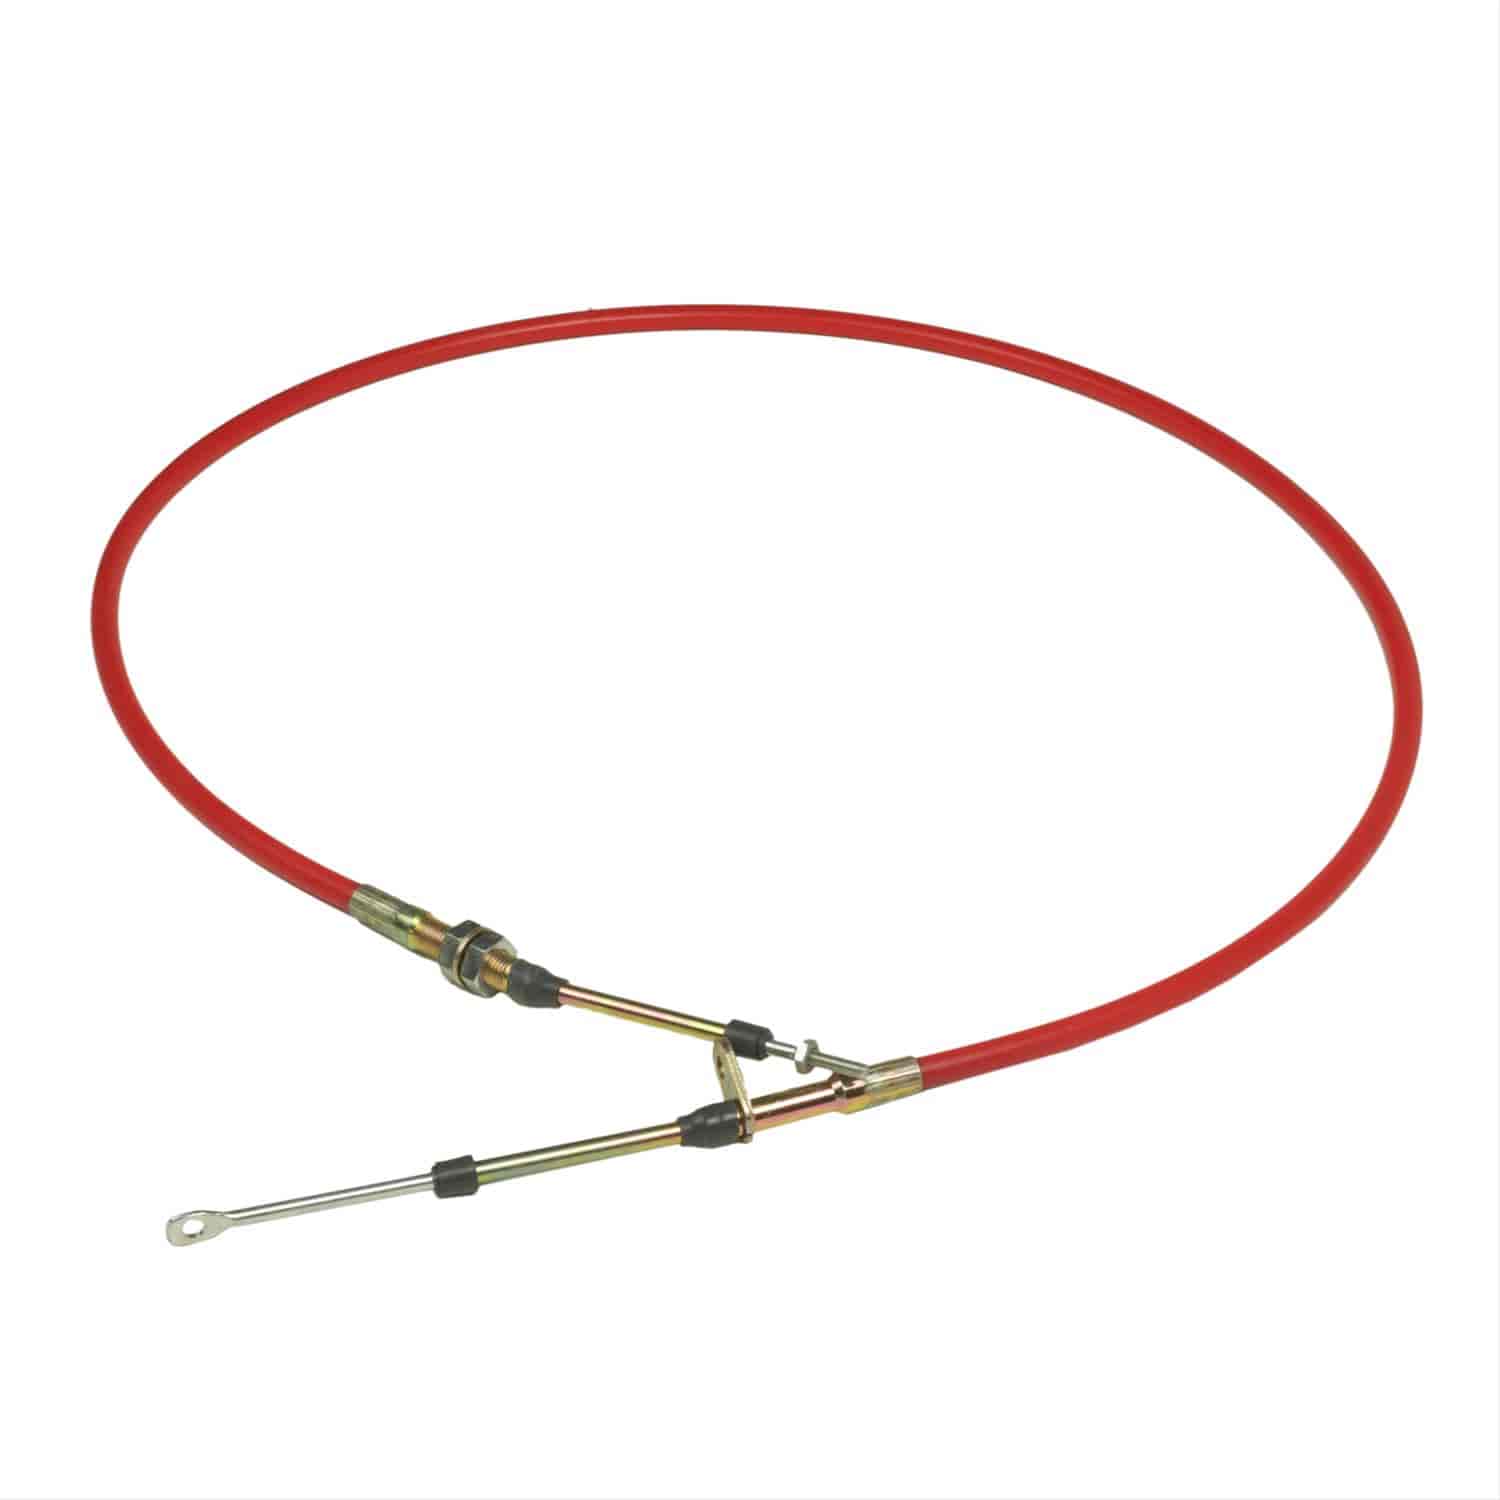 Super-Duty Race Shifter Cable 5 Ft. Length Red